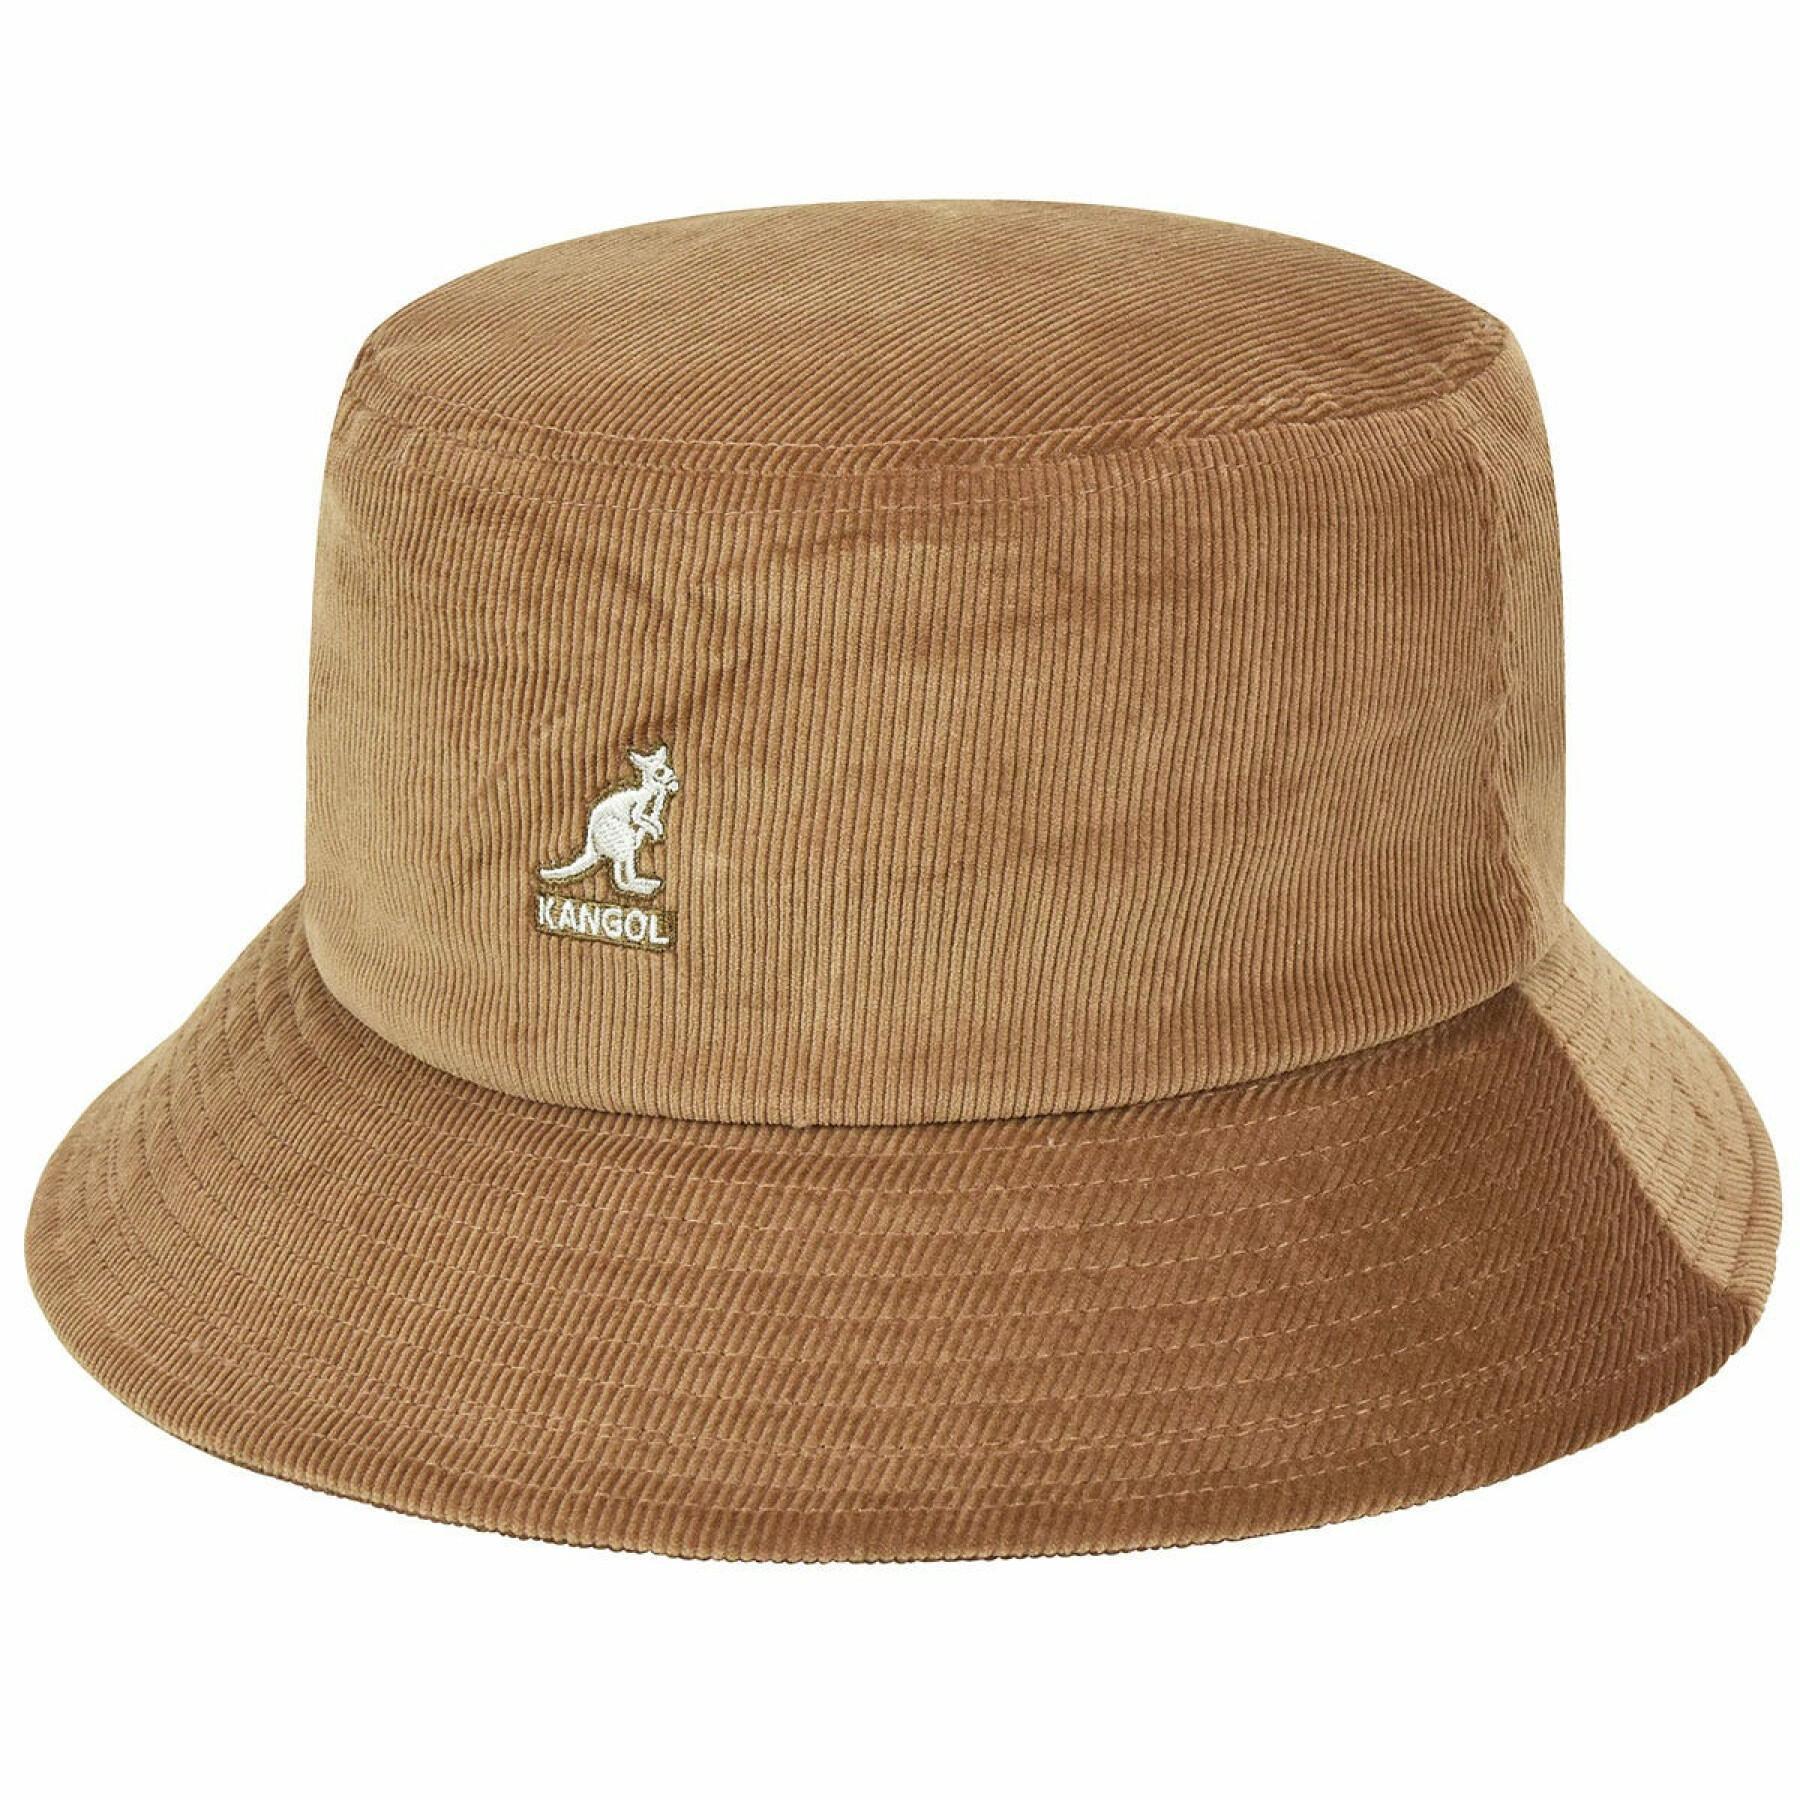 Kangol bucket hat with cord